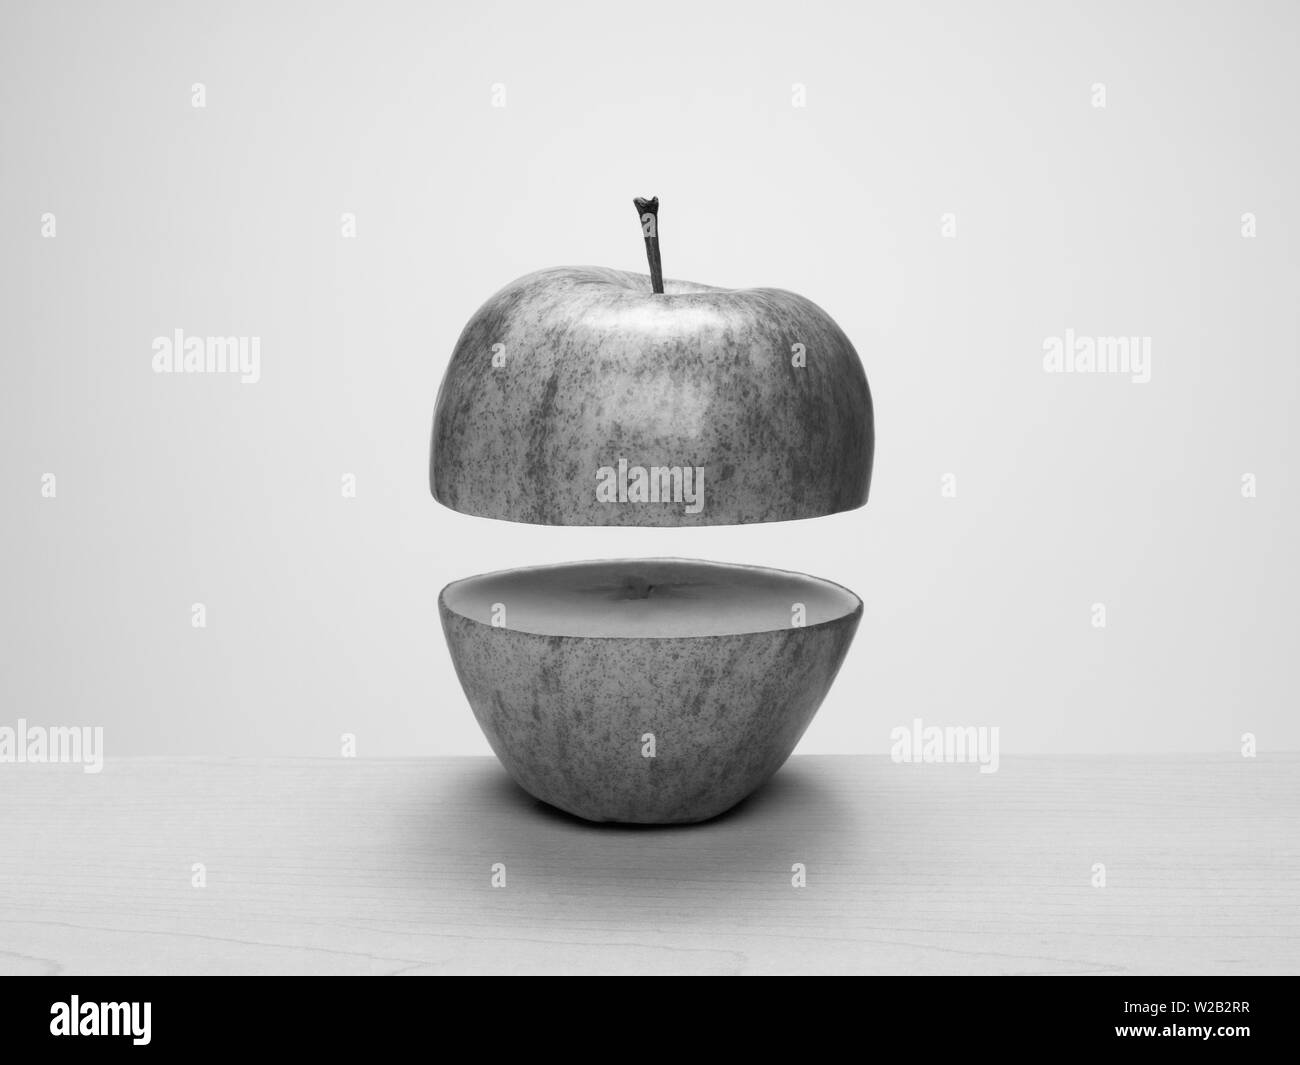 Black and white apple cut in half, separated and floating apart. Concept: parts, apart, float, levitate, separation Stock Photo